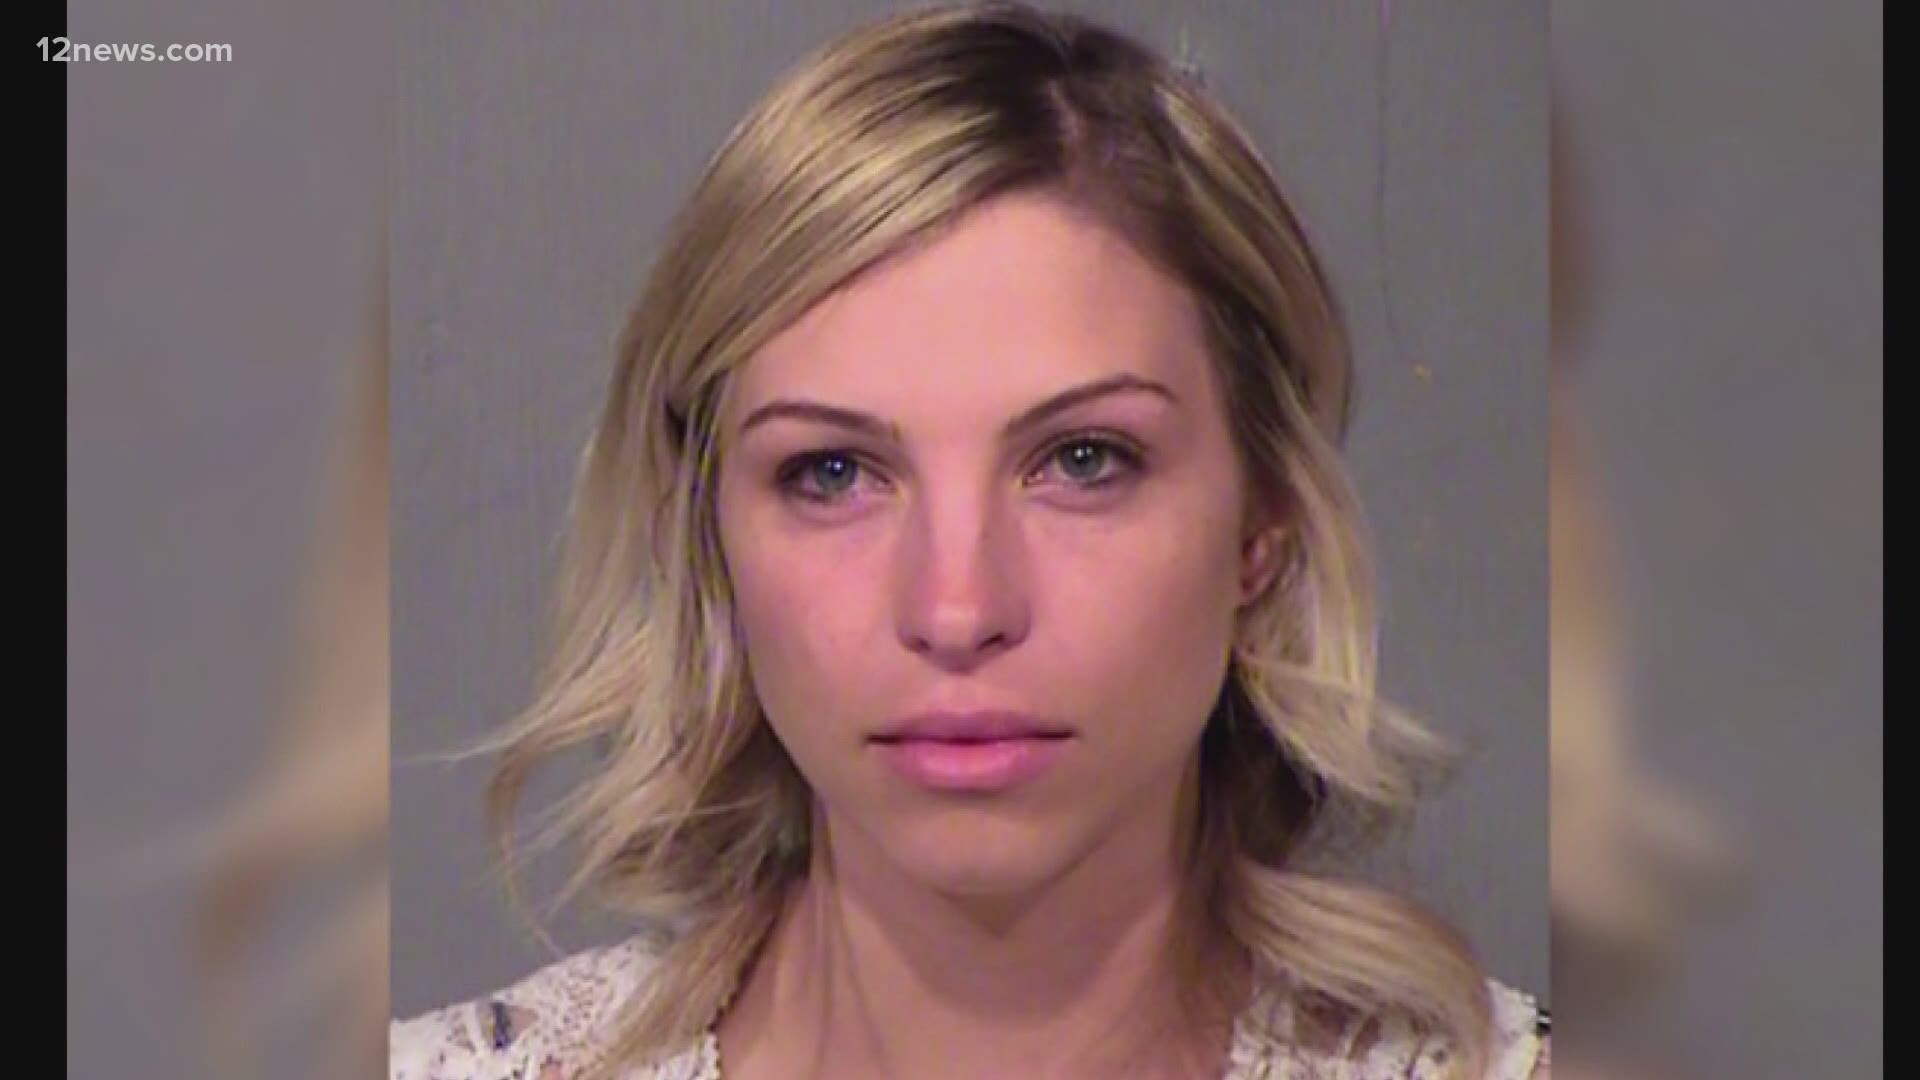 The former Arizona sixth-grade teacher was sentenced to 20 years in prison for having sexual contact with her 13-year-old student.